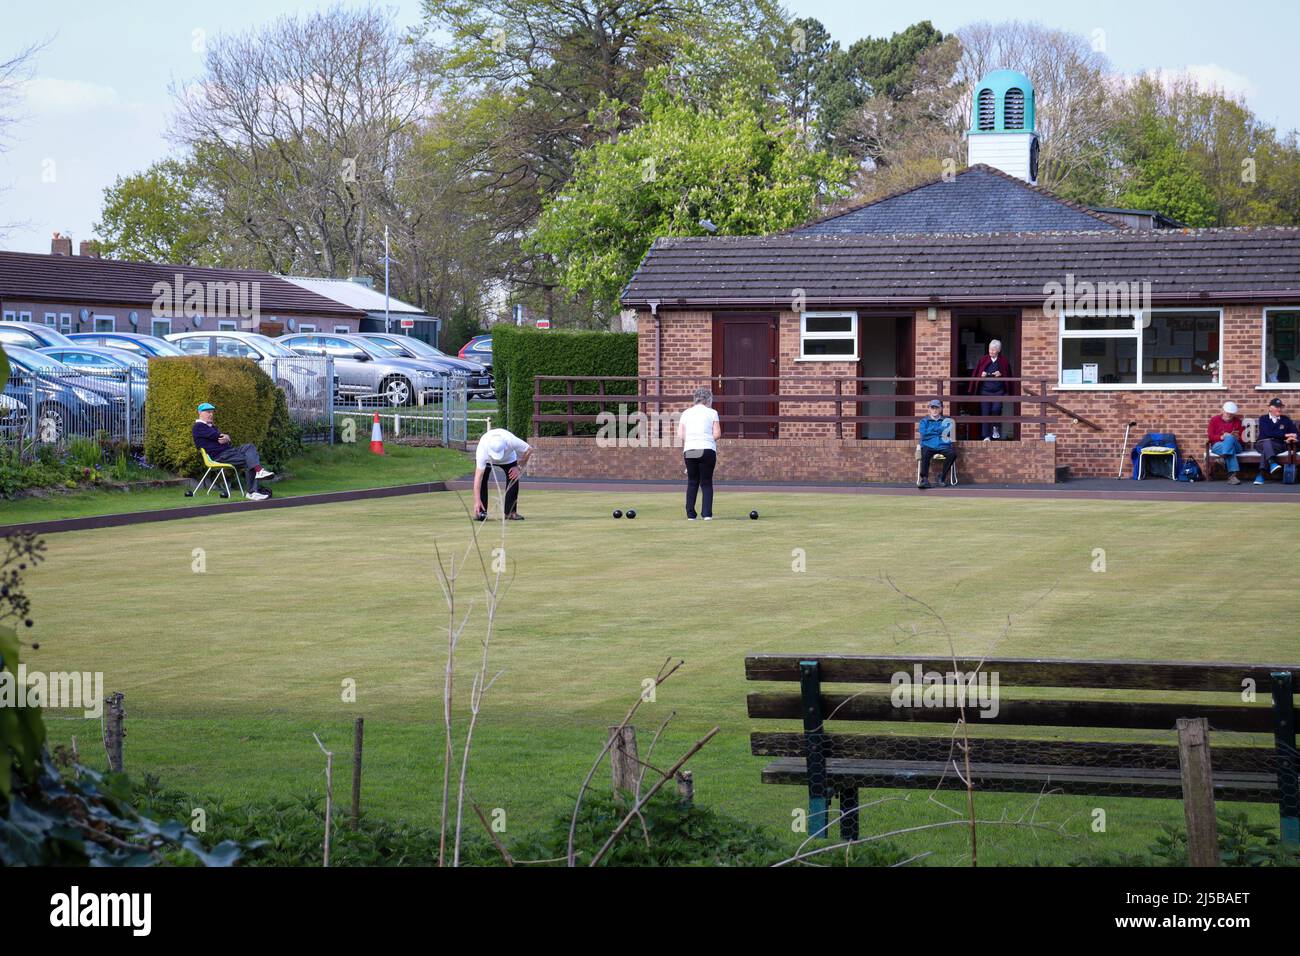 People playing Bowls Stock Photo